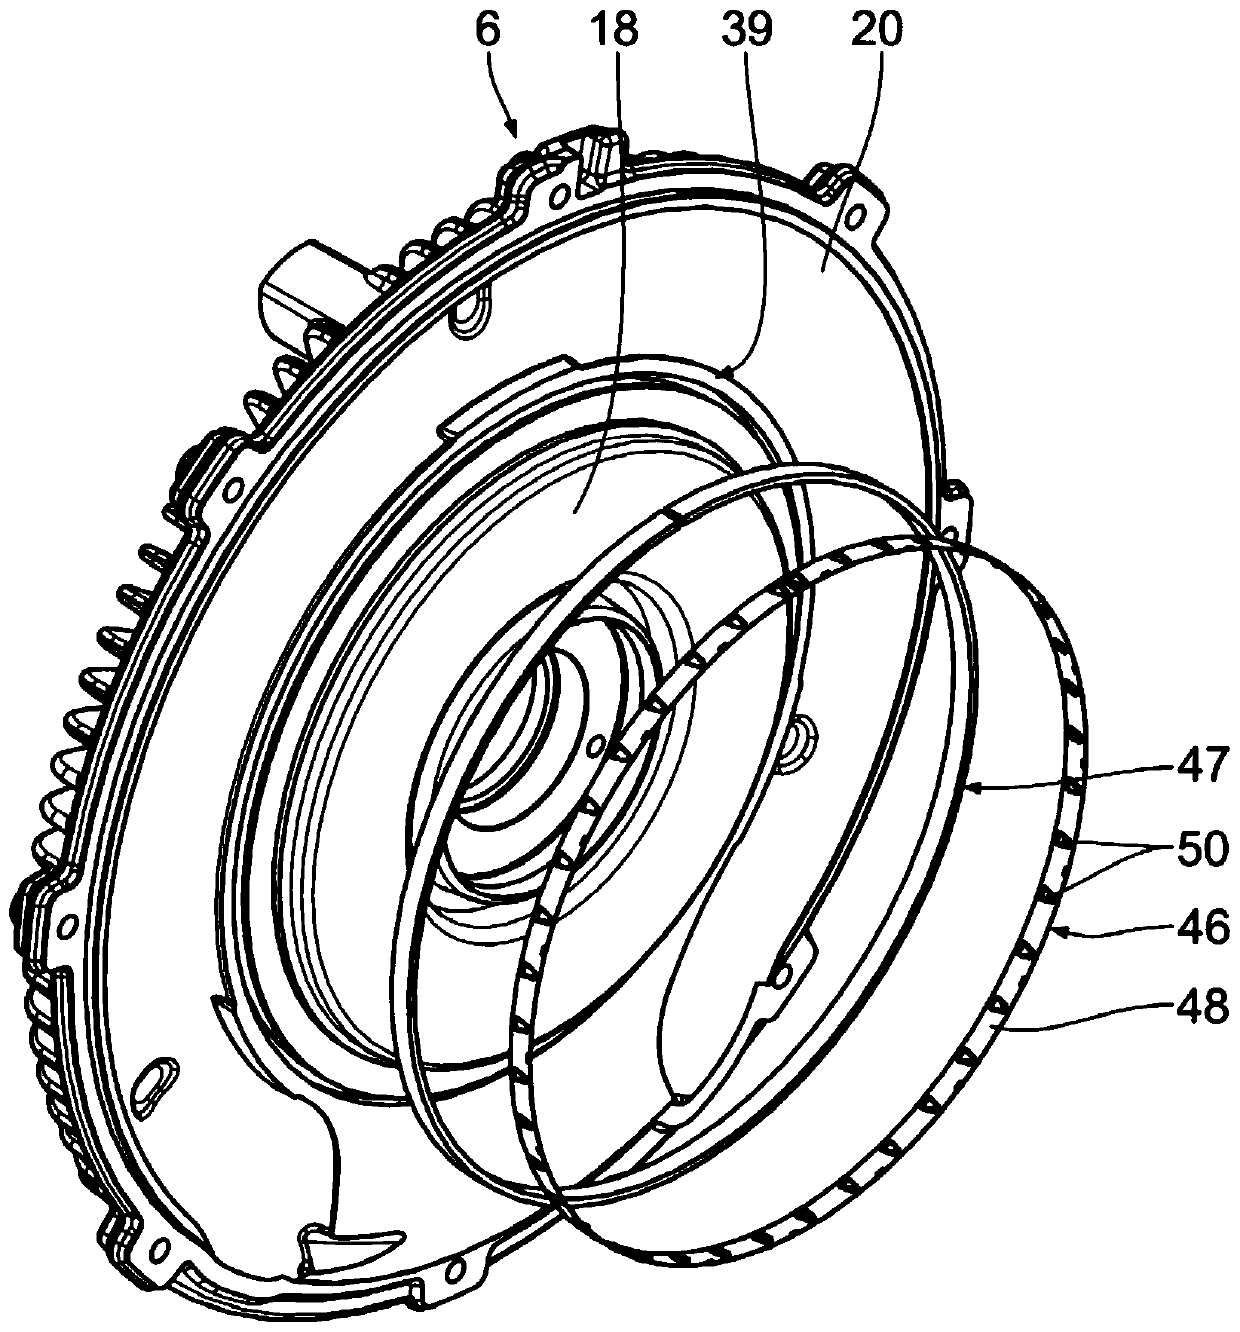 Side channel compressor having a seal assembly